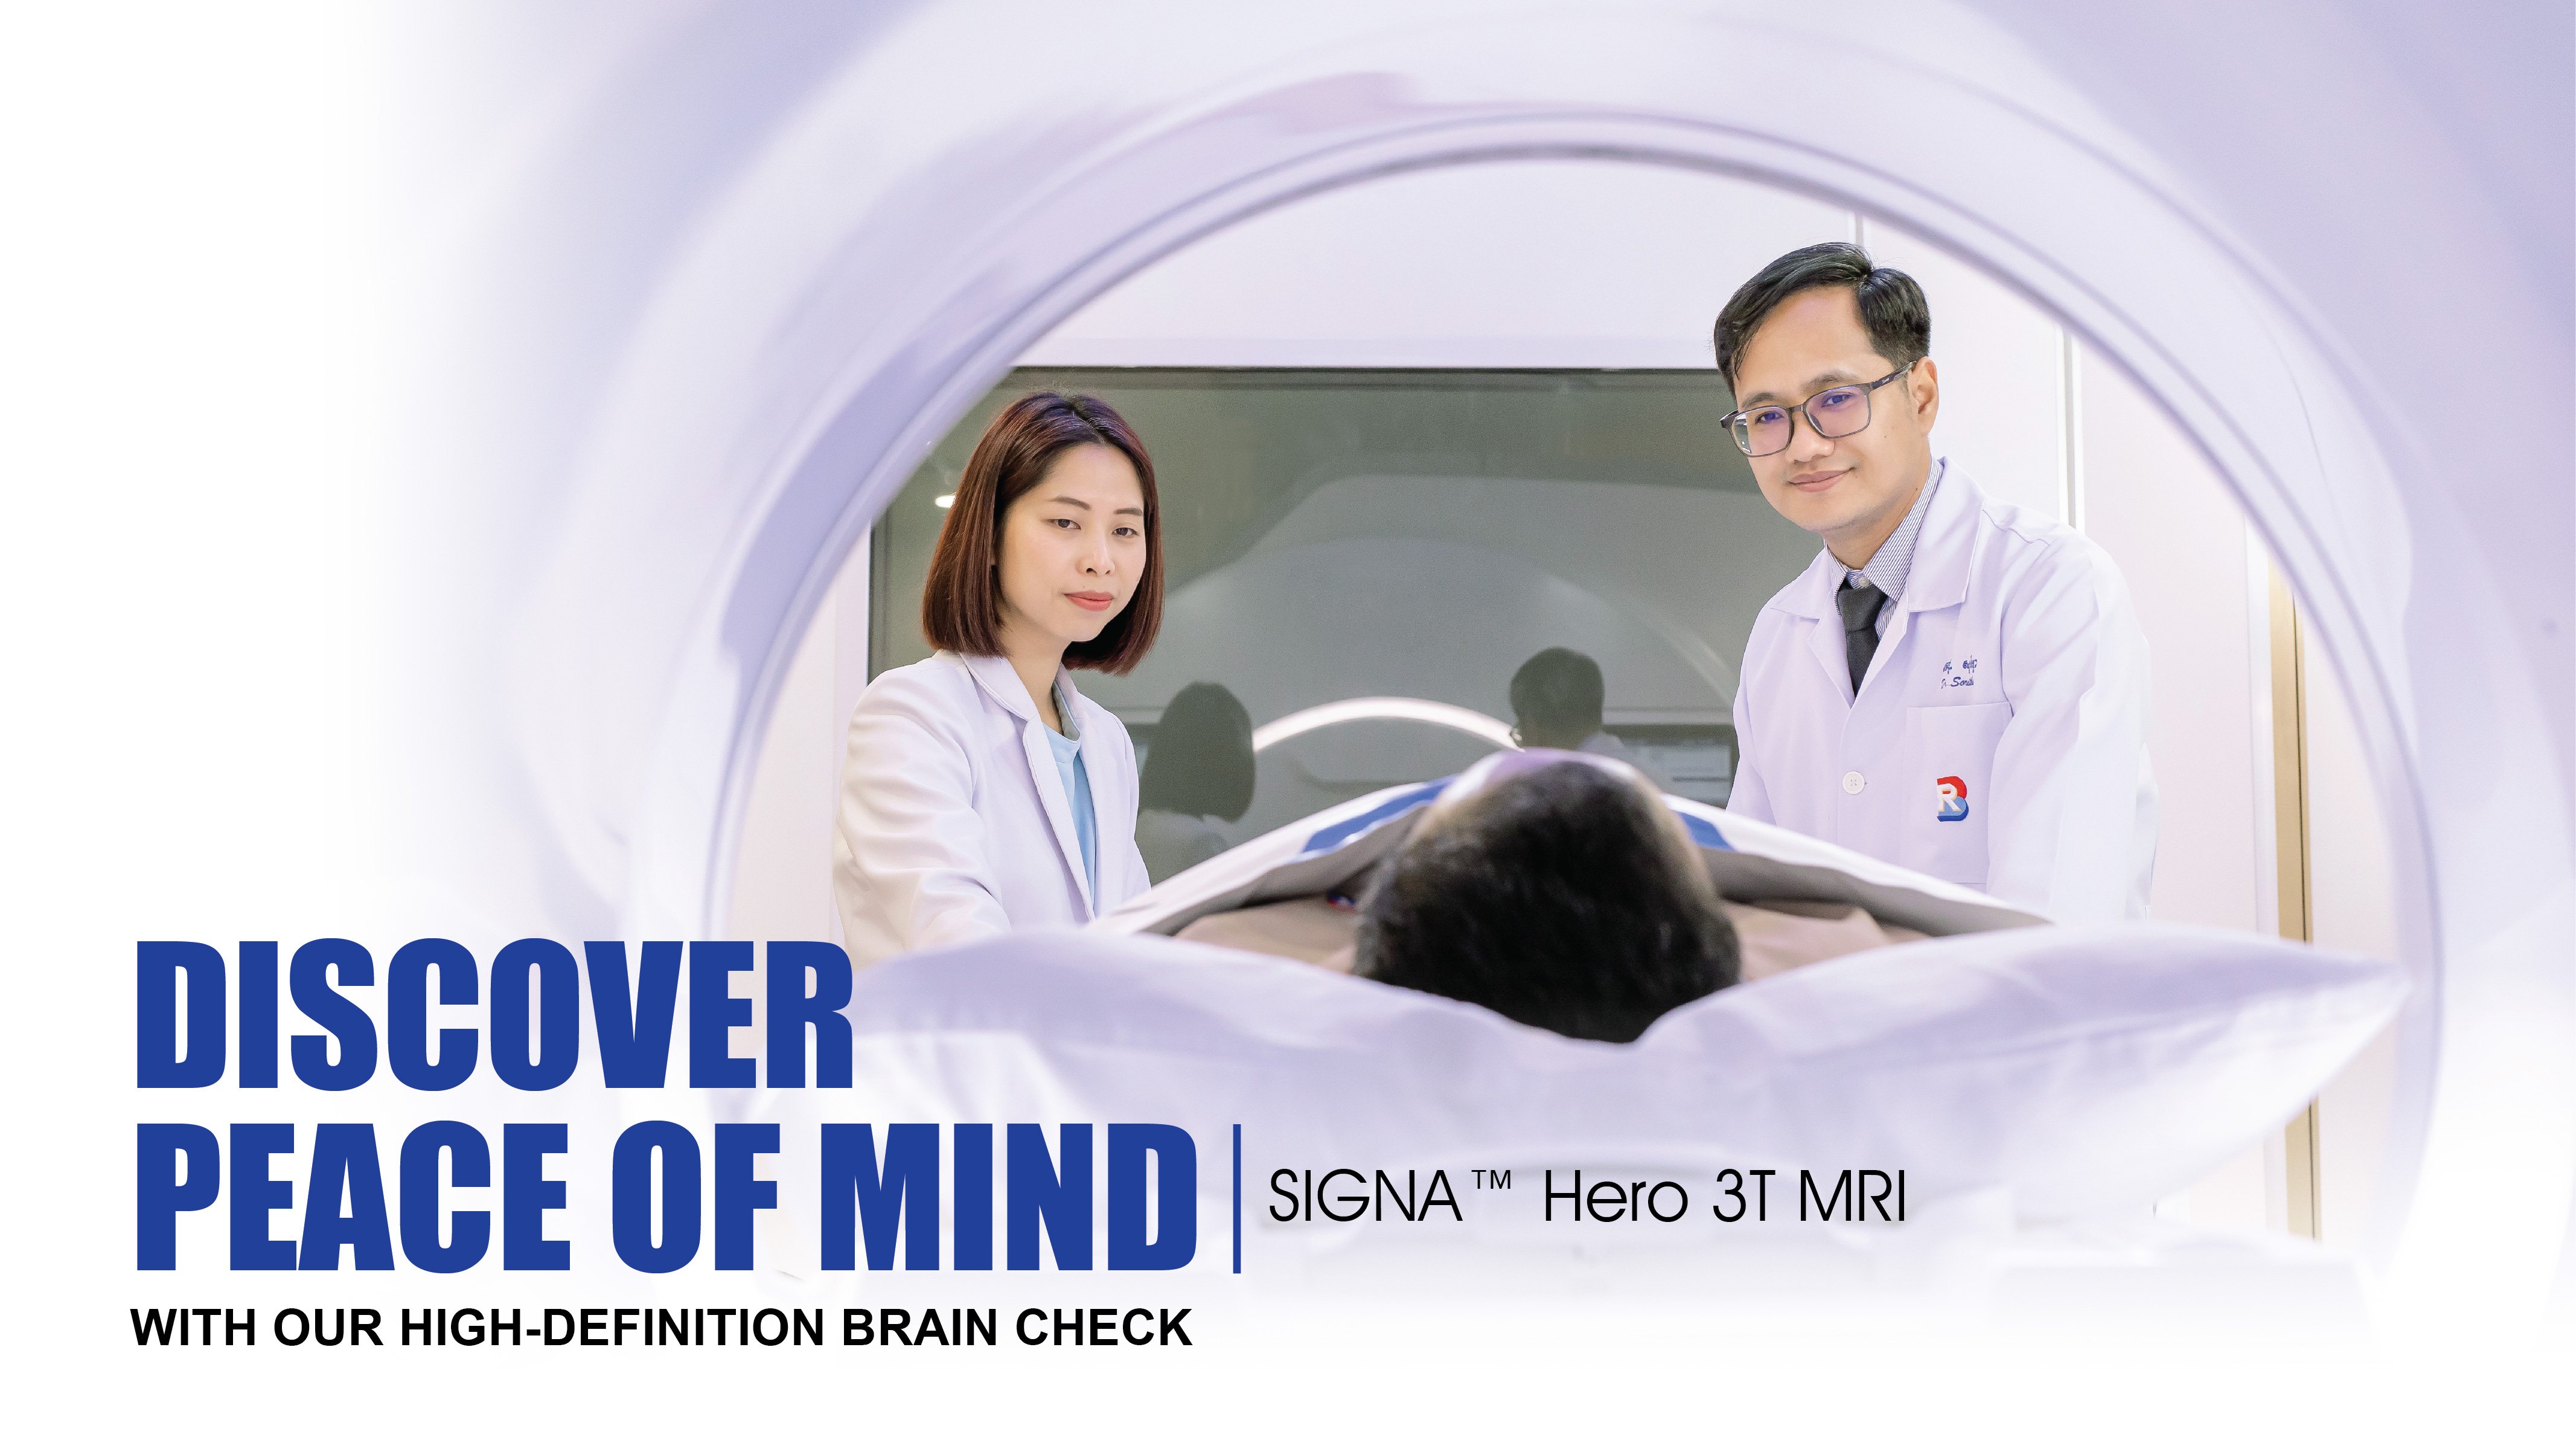 DISCOVER PEACE OF MIND WITH OUR HIGH-DEFINITION BRAIN CHECK